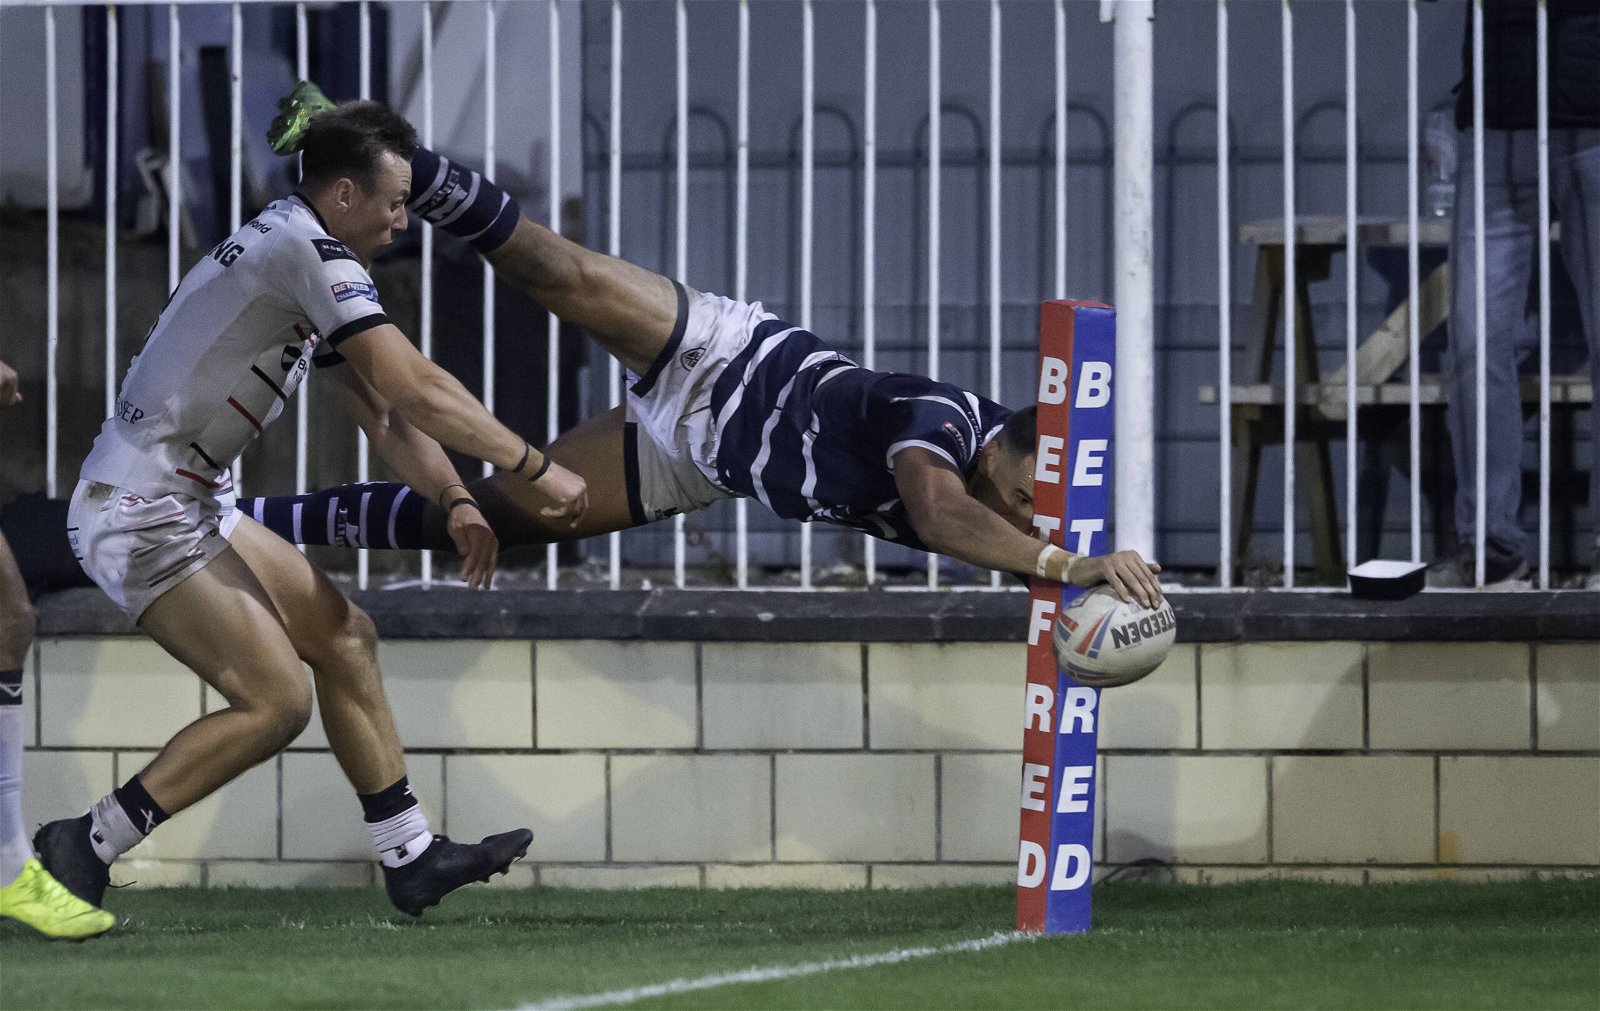 Featherstone Rovers' winger Gareth Gale scored a hattrick in today's 1895 Cup clash.